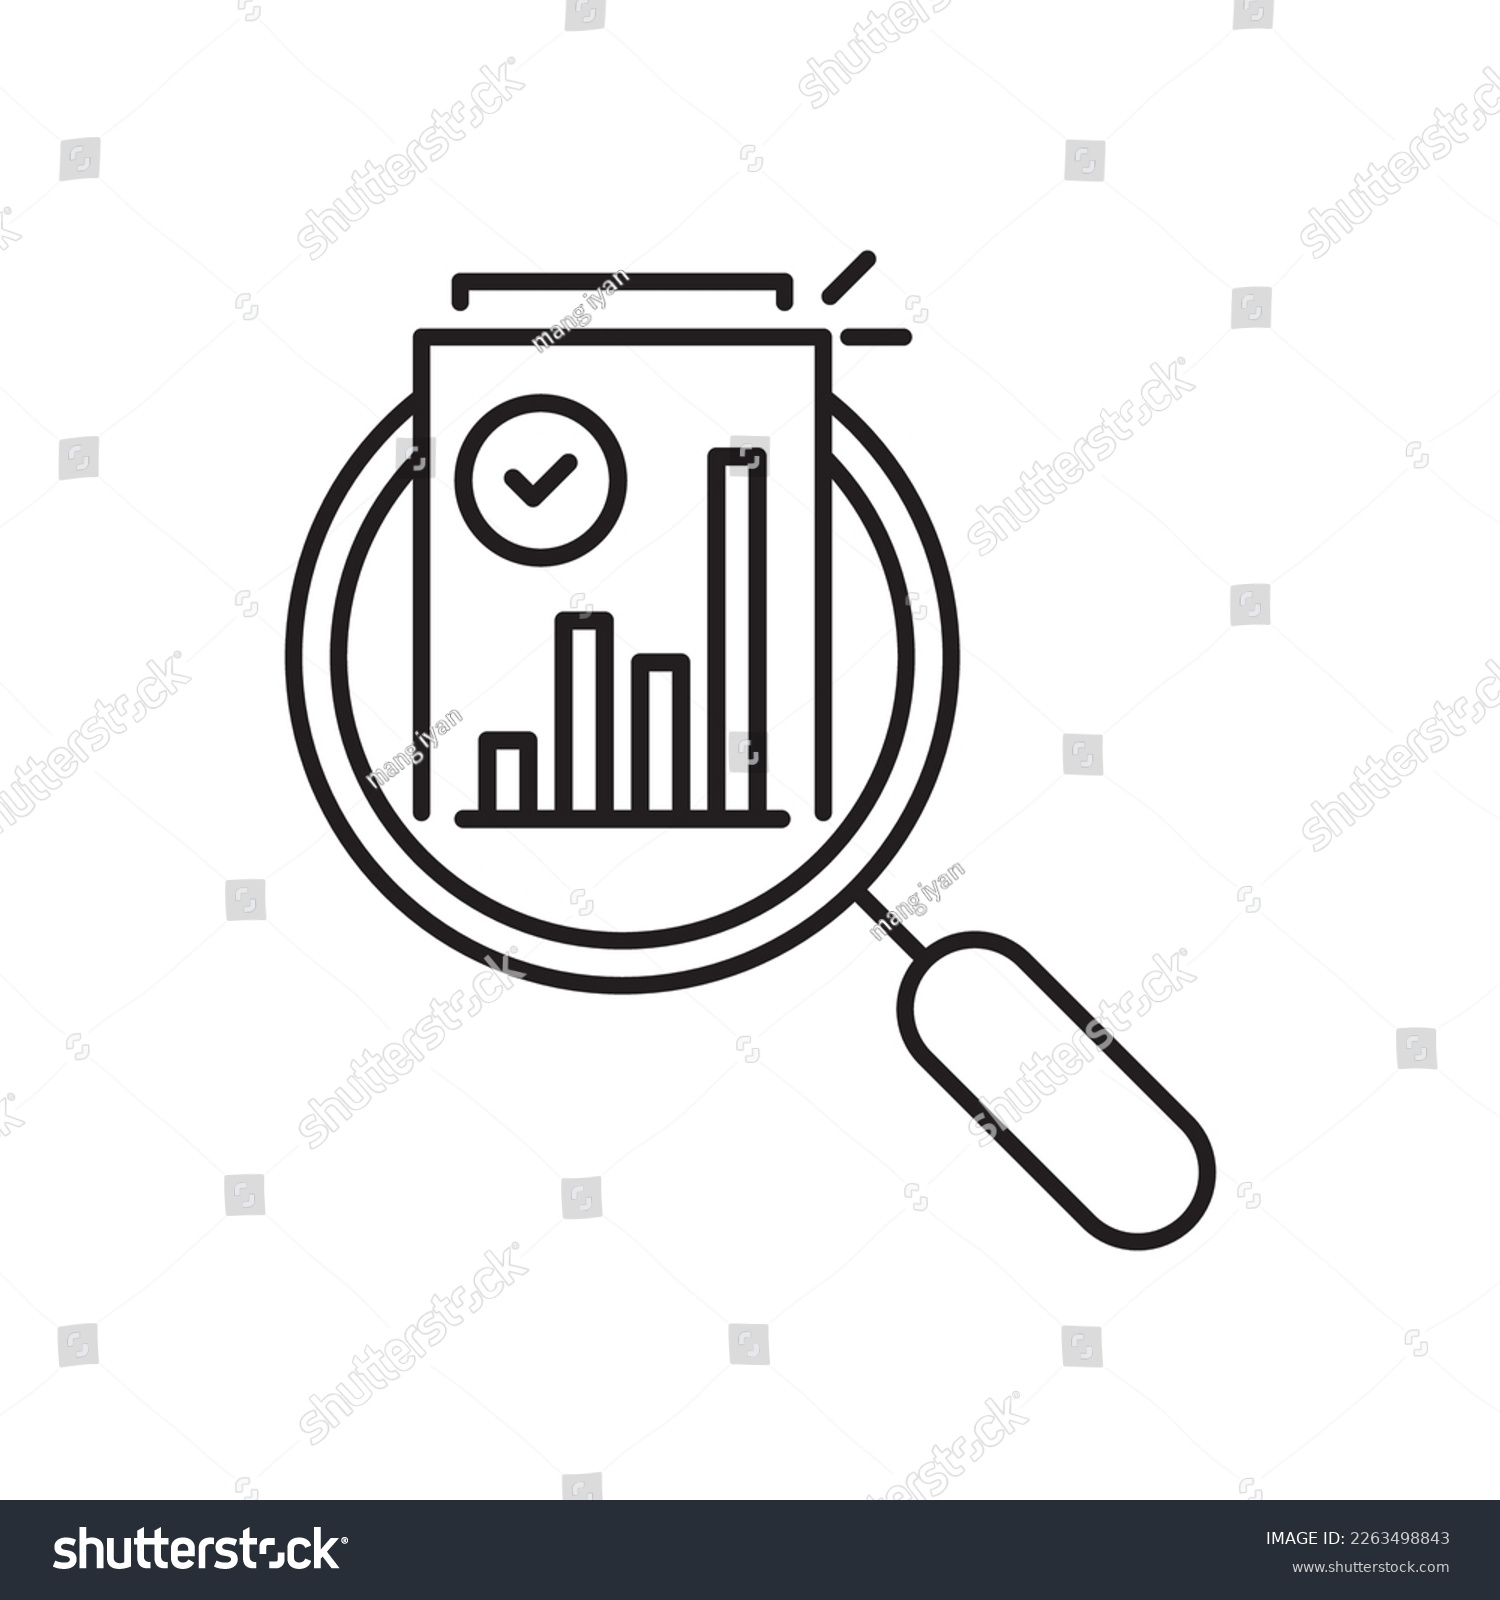 thin line magnifier like income scrutiny overview icon. flat trend lineart simple exam or profit logotype stroke art web design isolated on white. concept of inspection pictogram or survey symbol